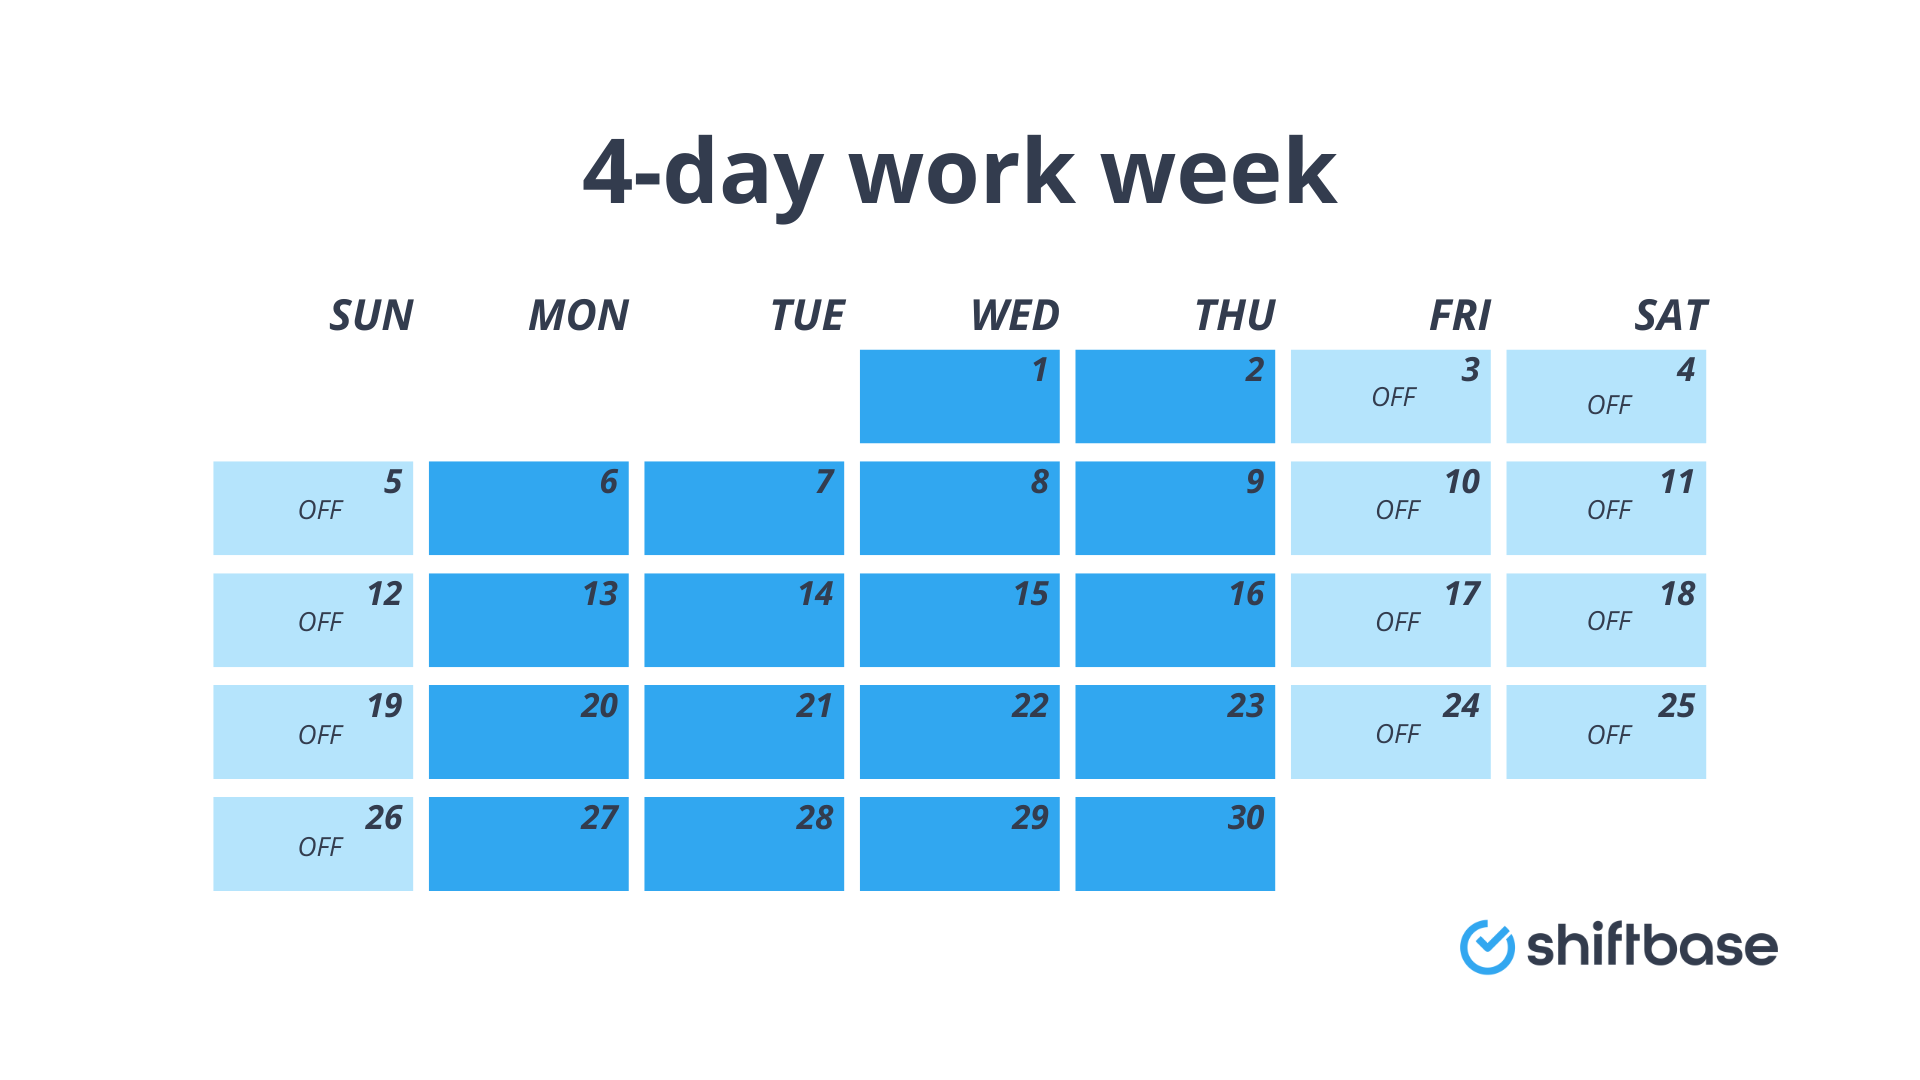 4 day work week schedule example by Shiftbase